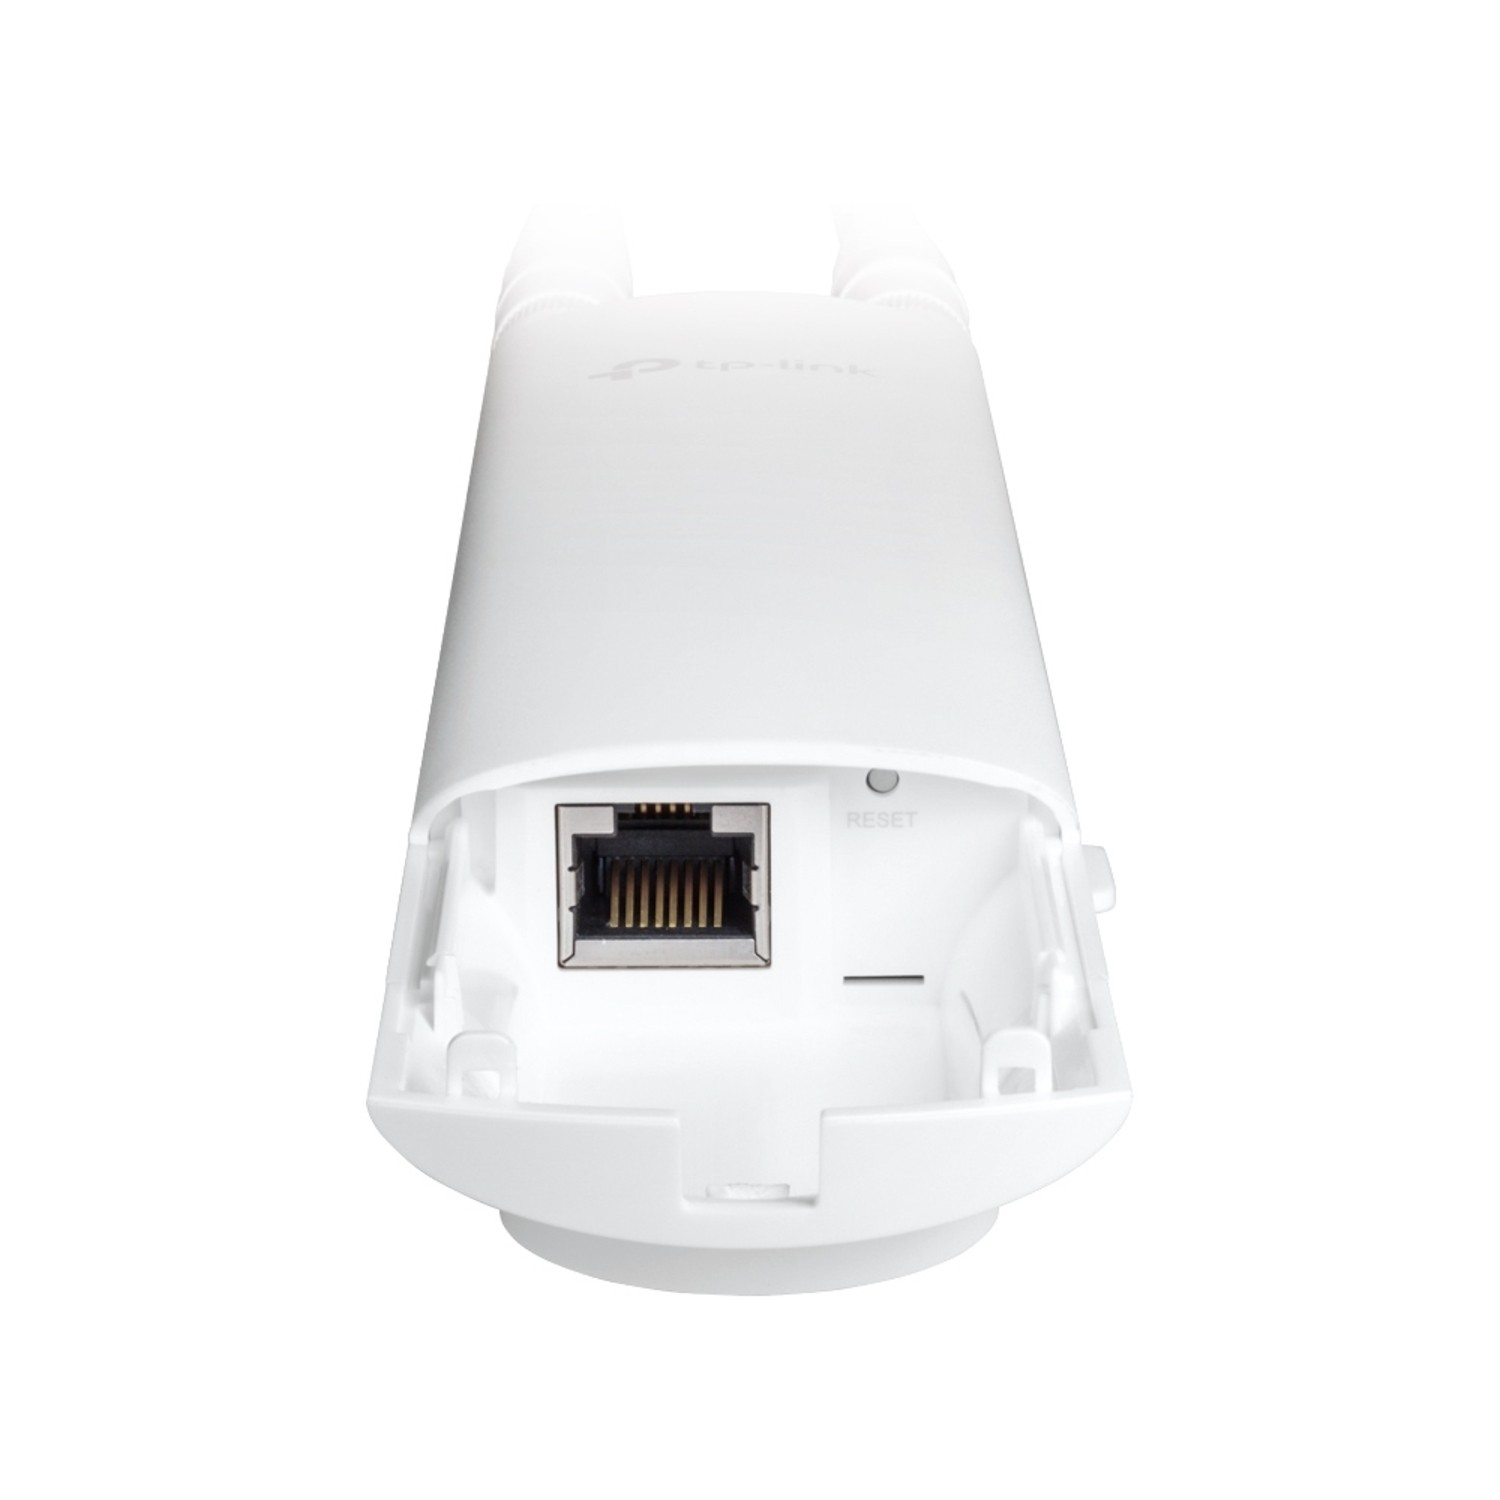 TP-LINK%20EAP225-OUTDOOR%201200MBPS%201PORT%20POE%202ANTEN%205DBI%202.4/5GHz%20OUTDOOR%20ACCESS%20POINT